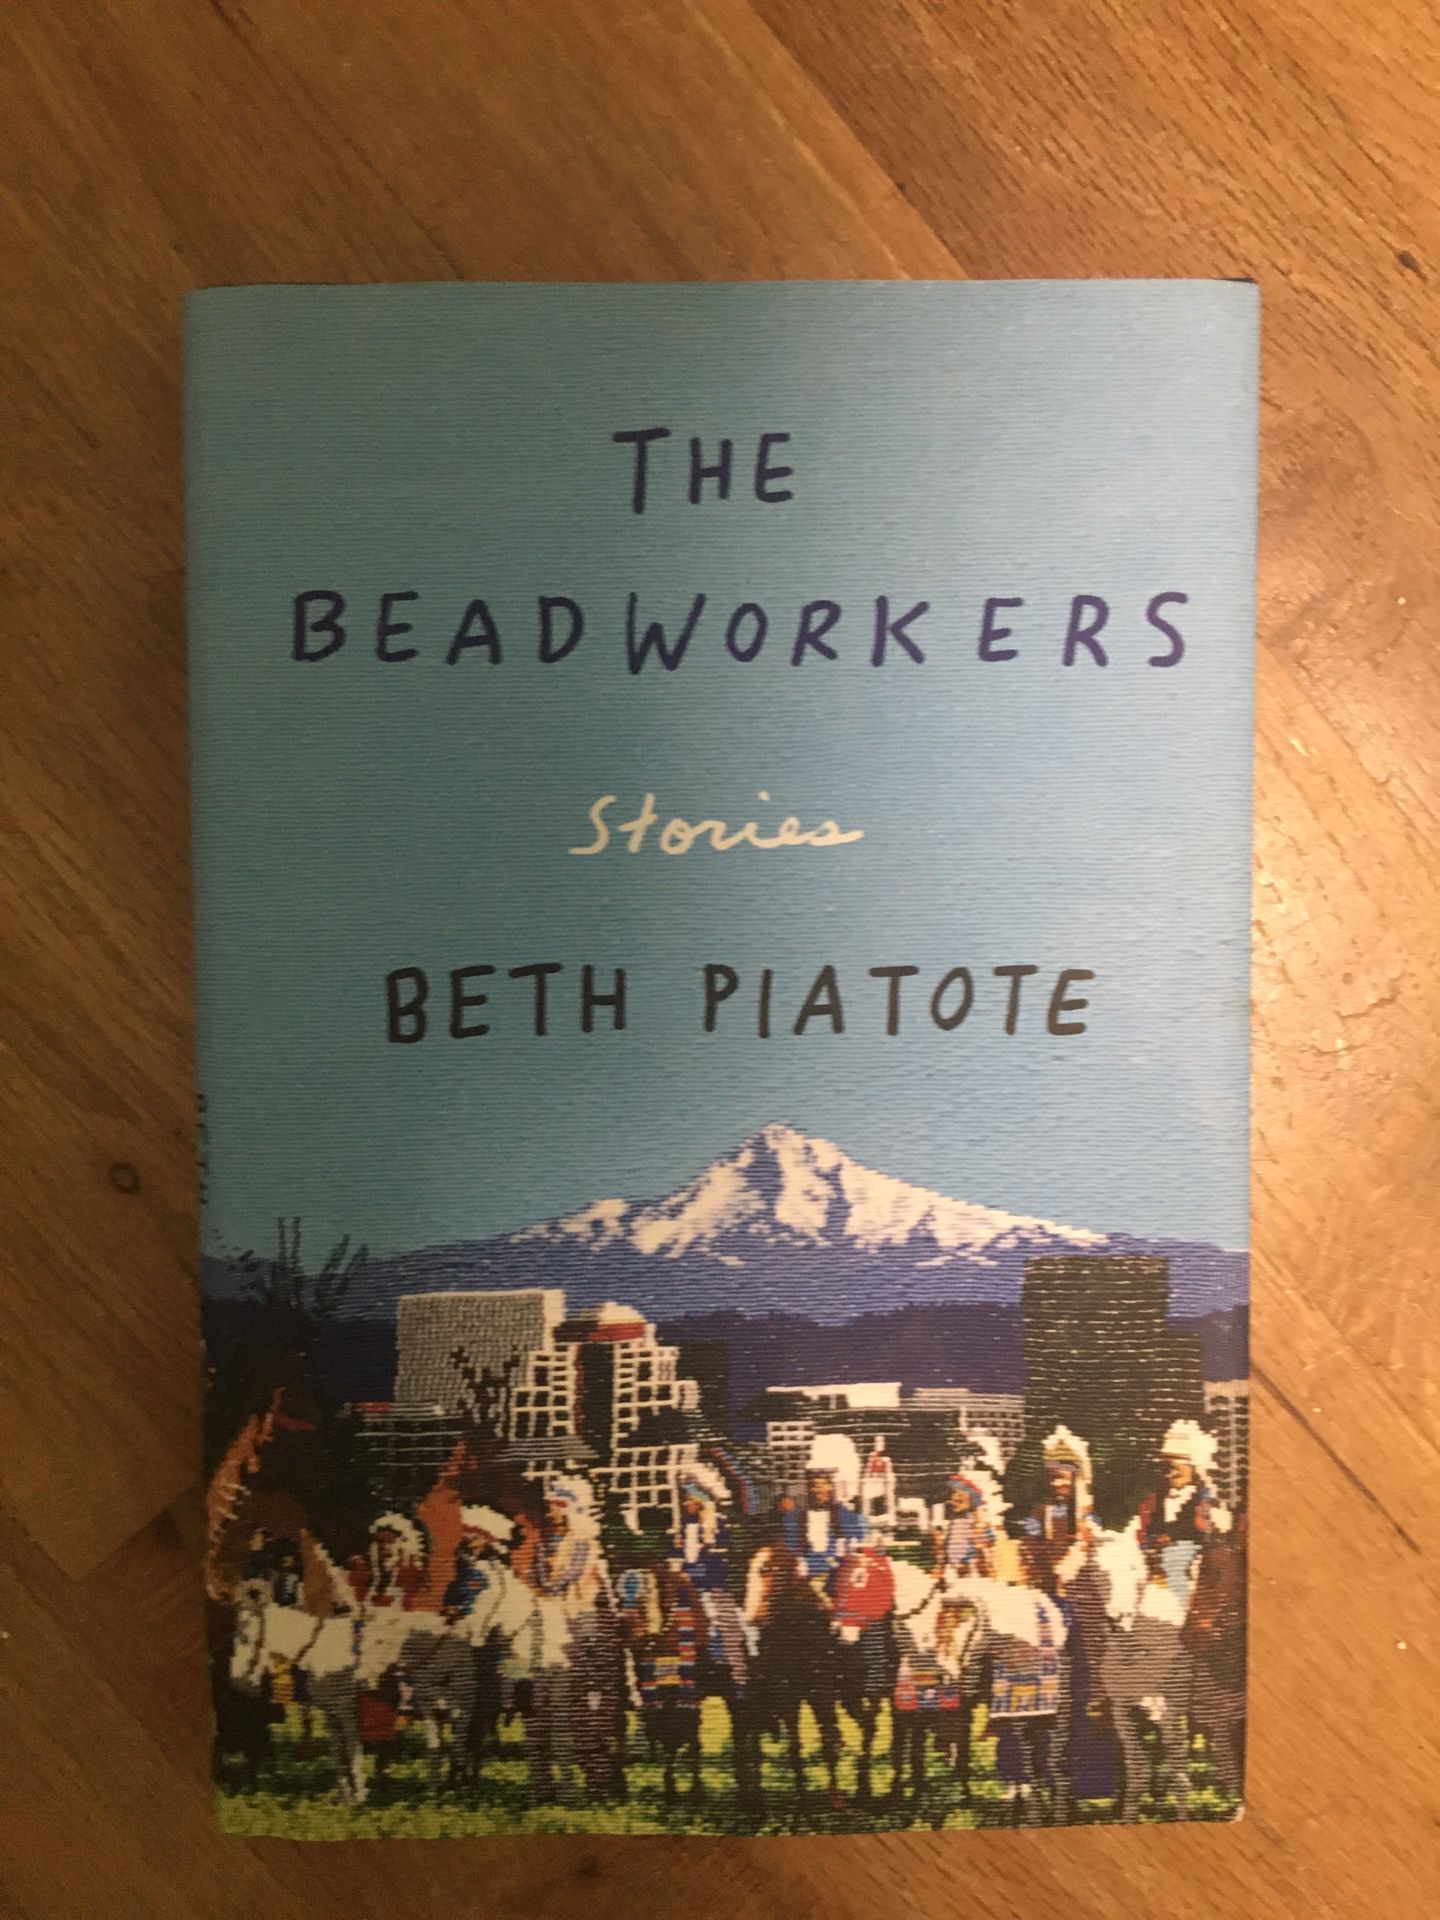 The Beadworkers Stories Beth Piatote